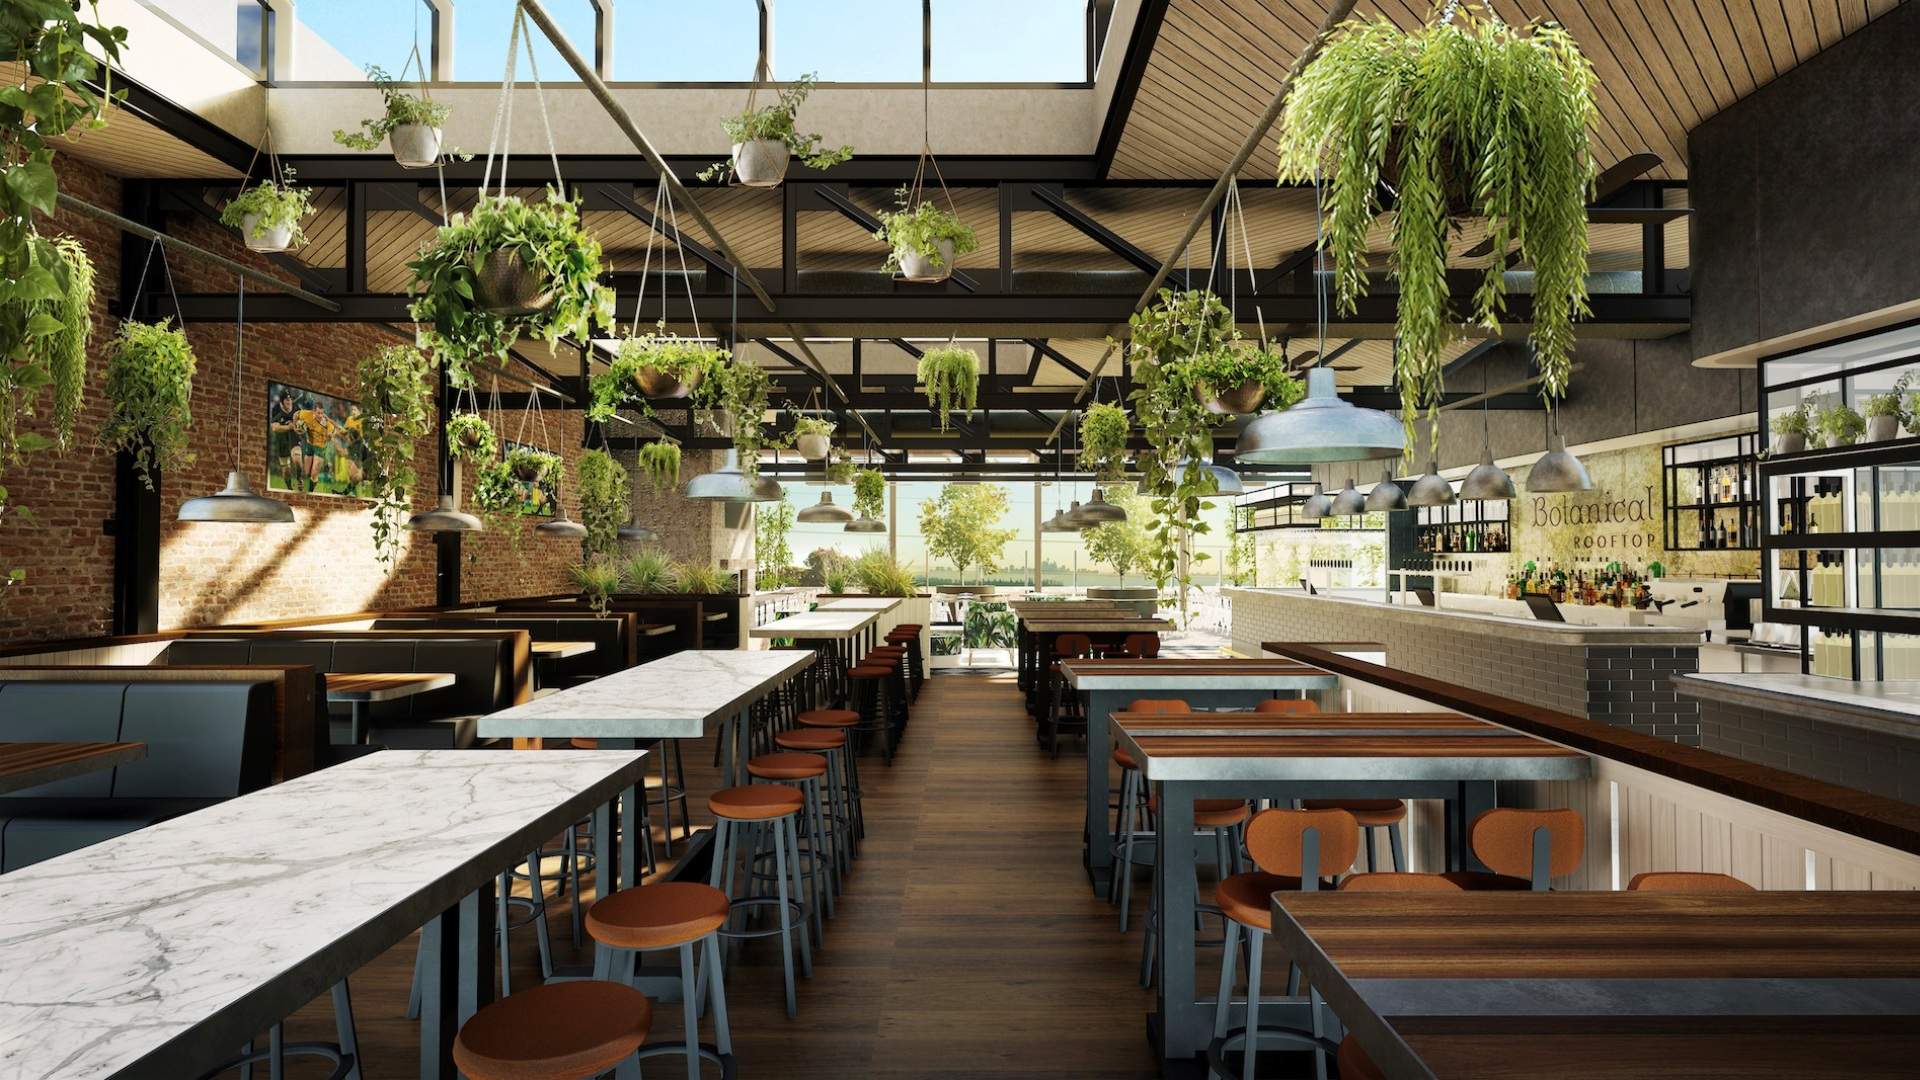 Meet Highfield Caringbah, the New Rooftop Bar Serving up Views of the City In Sydney's South